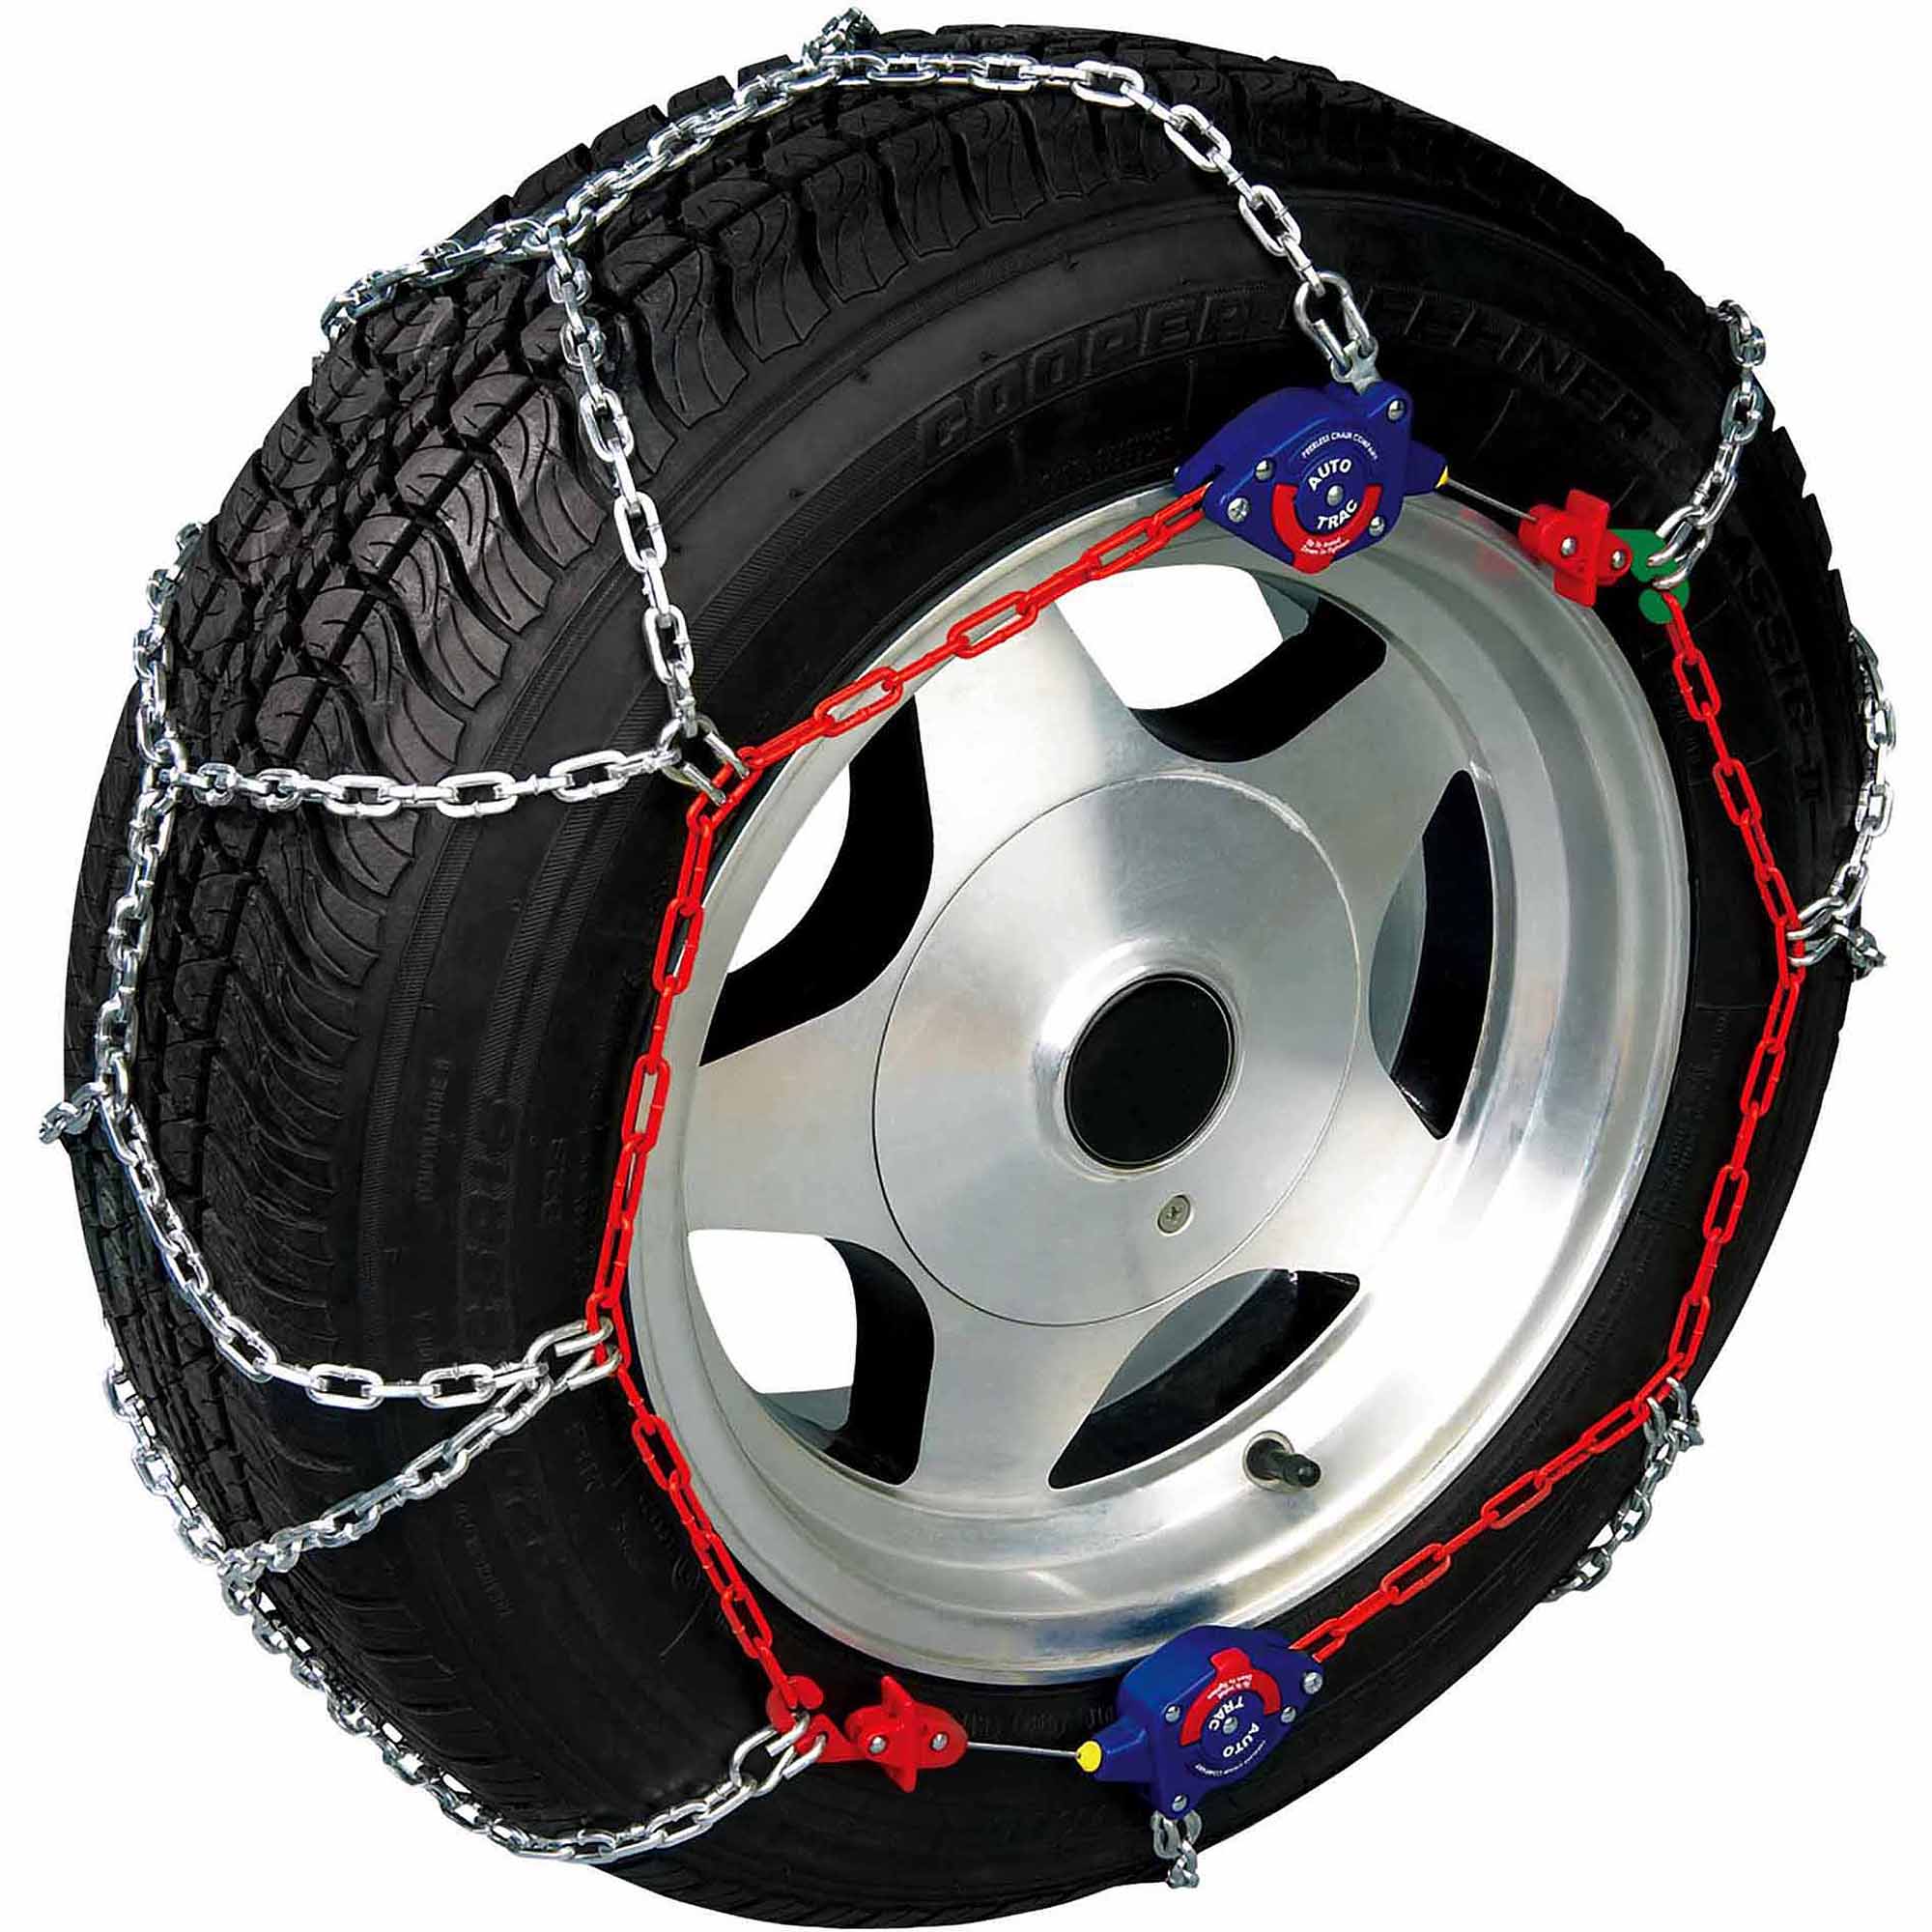 New Style Universal Snow Chains For Car/Van, Adjustable Universal Emergency  Anti Skid Tire Chains Winter Driving Security Tire Chains For Cars S L